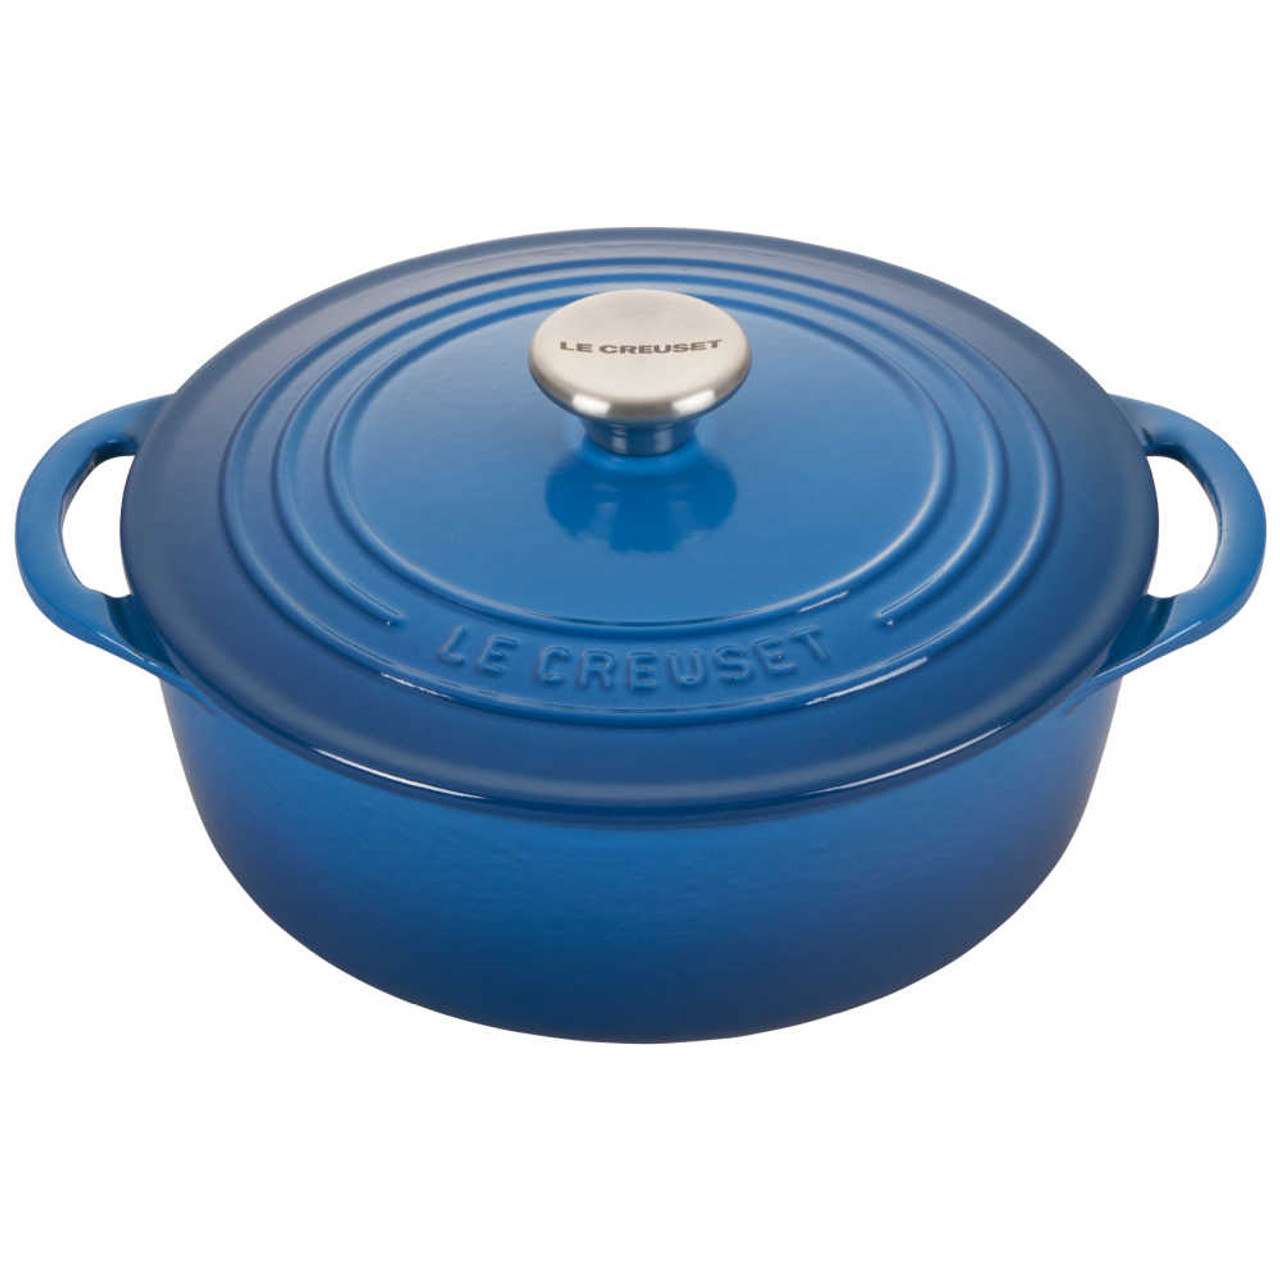 https://cdn11.bigcommerce.com/s-hccytny0od/images/stencil/1280x1280/products/5228/22564/Le_Creuset_Shallow_Round_Dutch_Oven_in_Marseille__78802.1674075782.jpg?c=2?imbypass=on